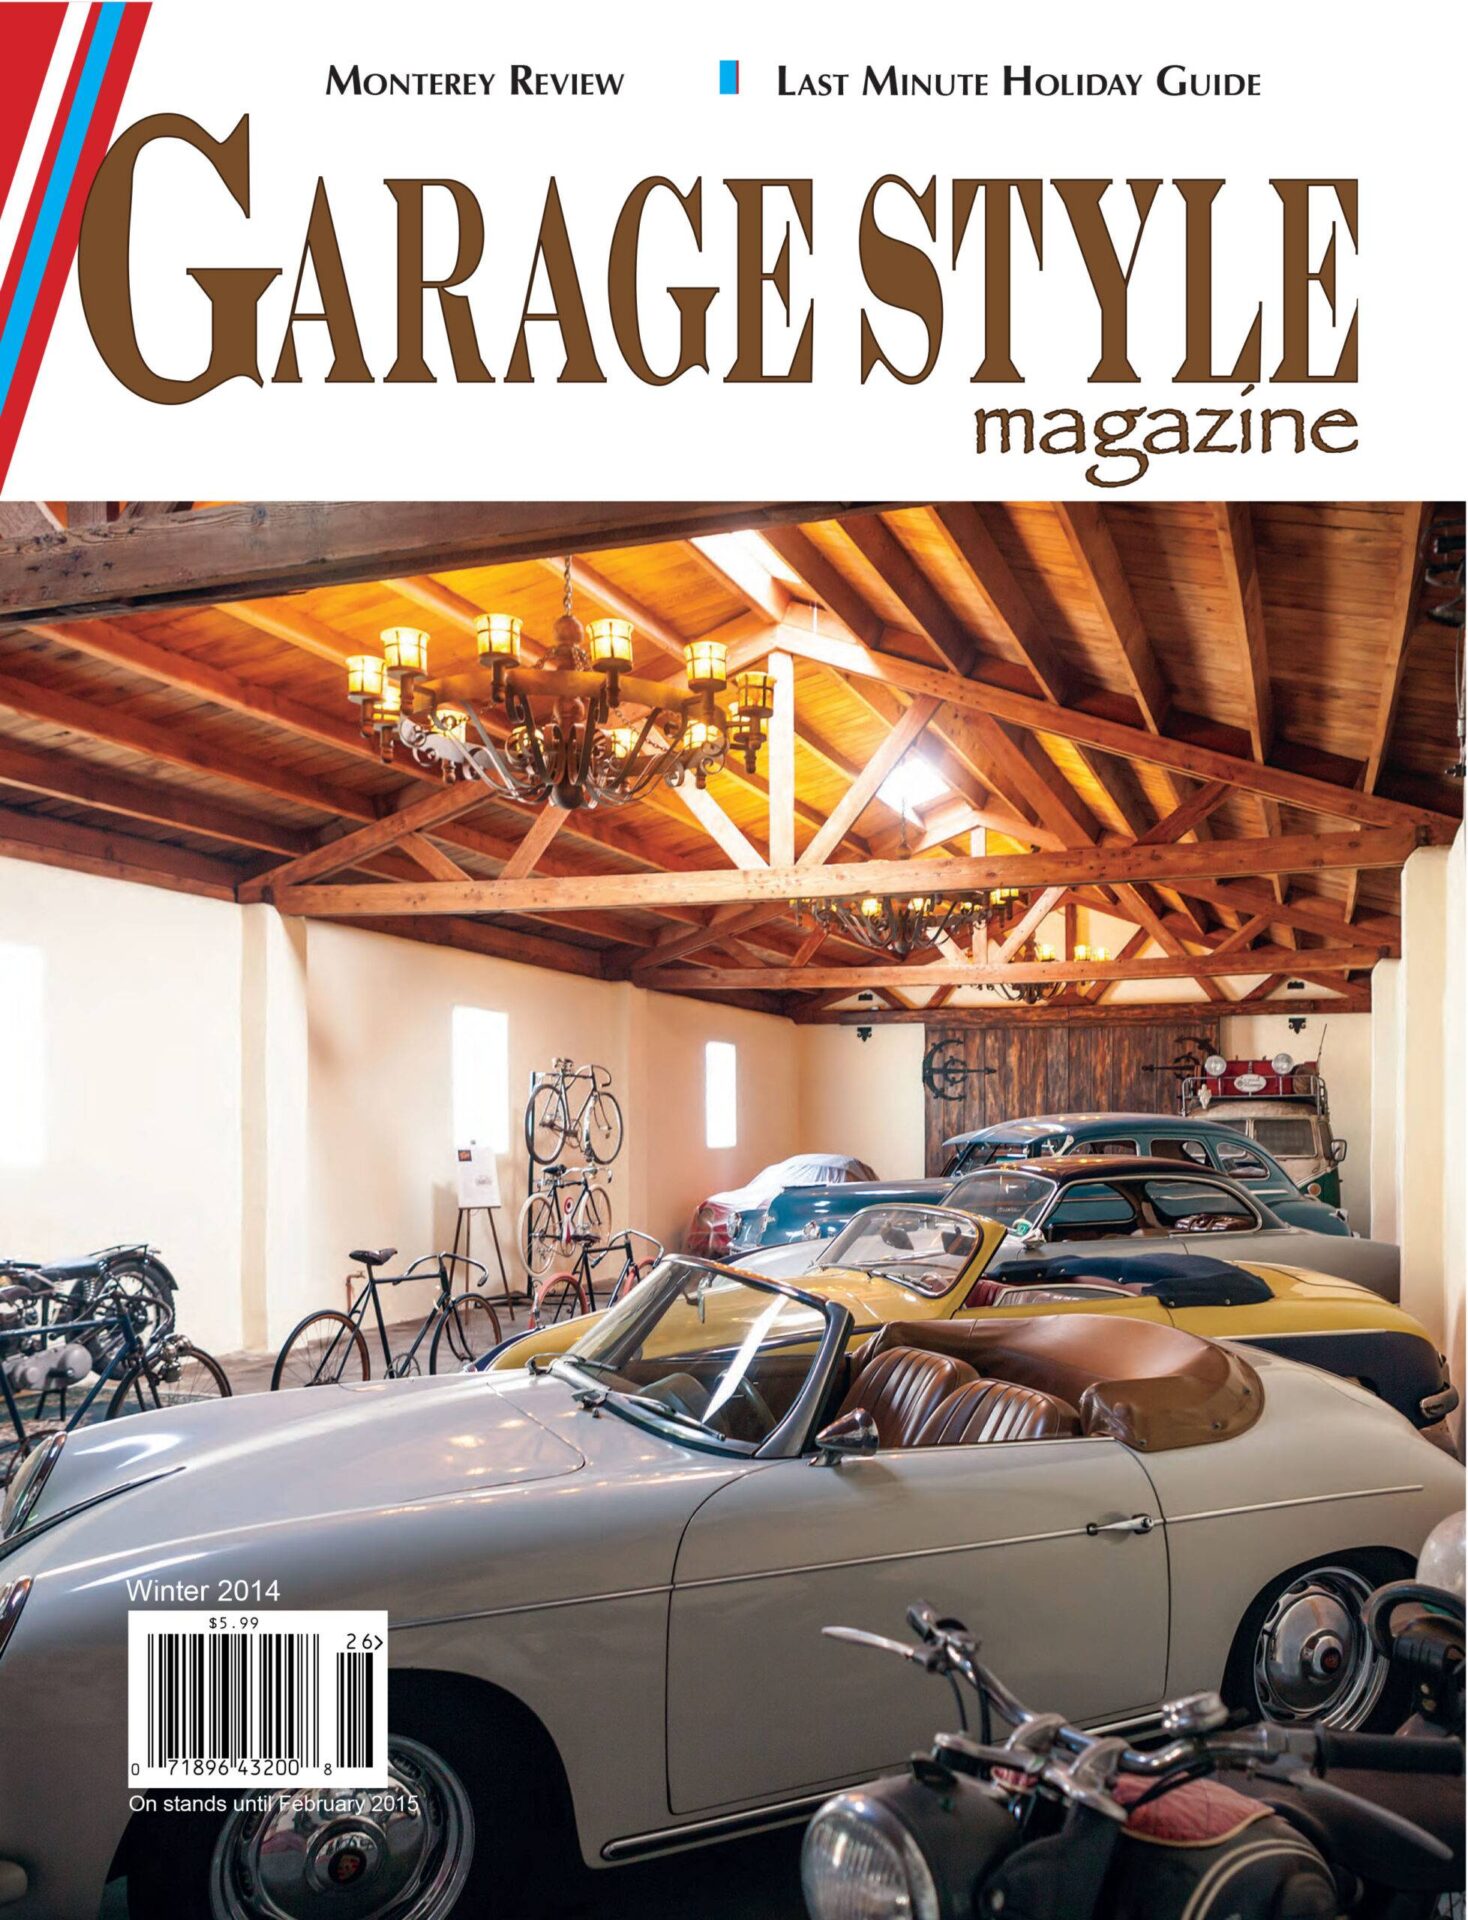 Issue 27, Cover